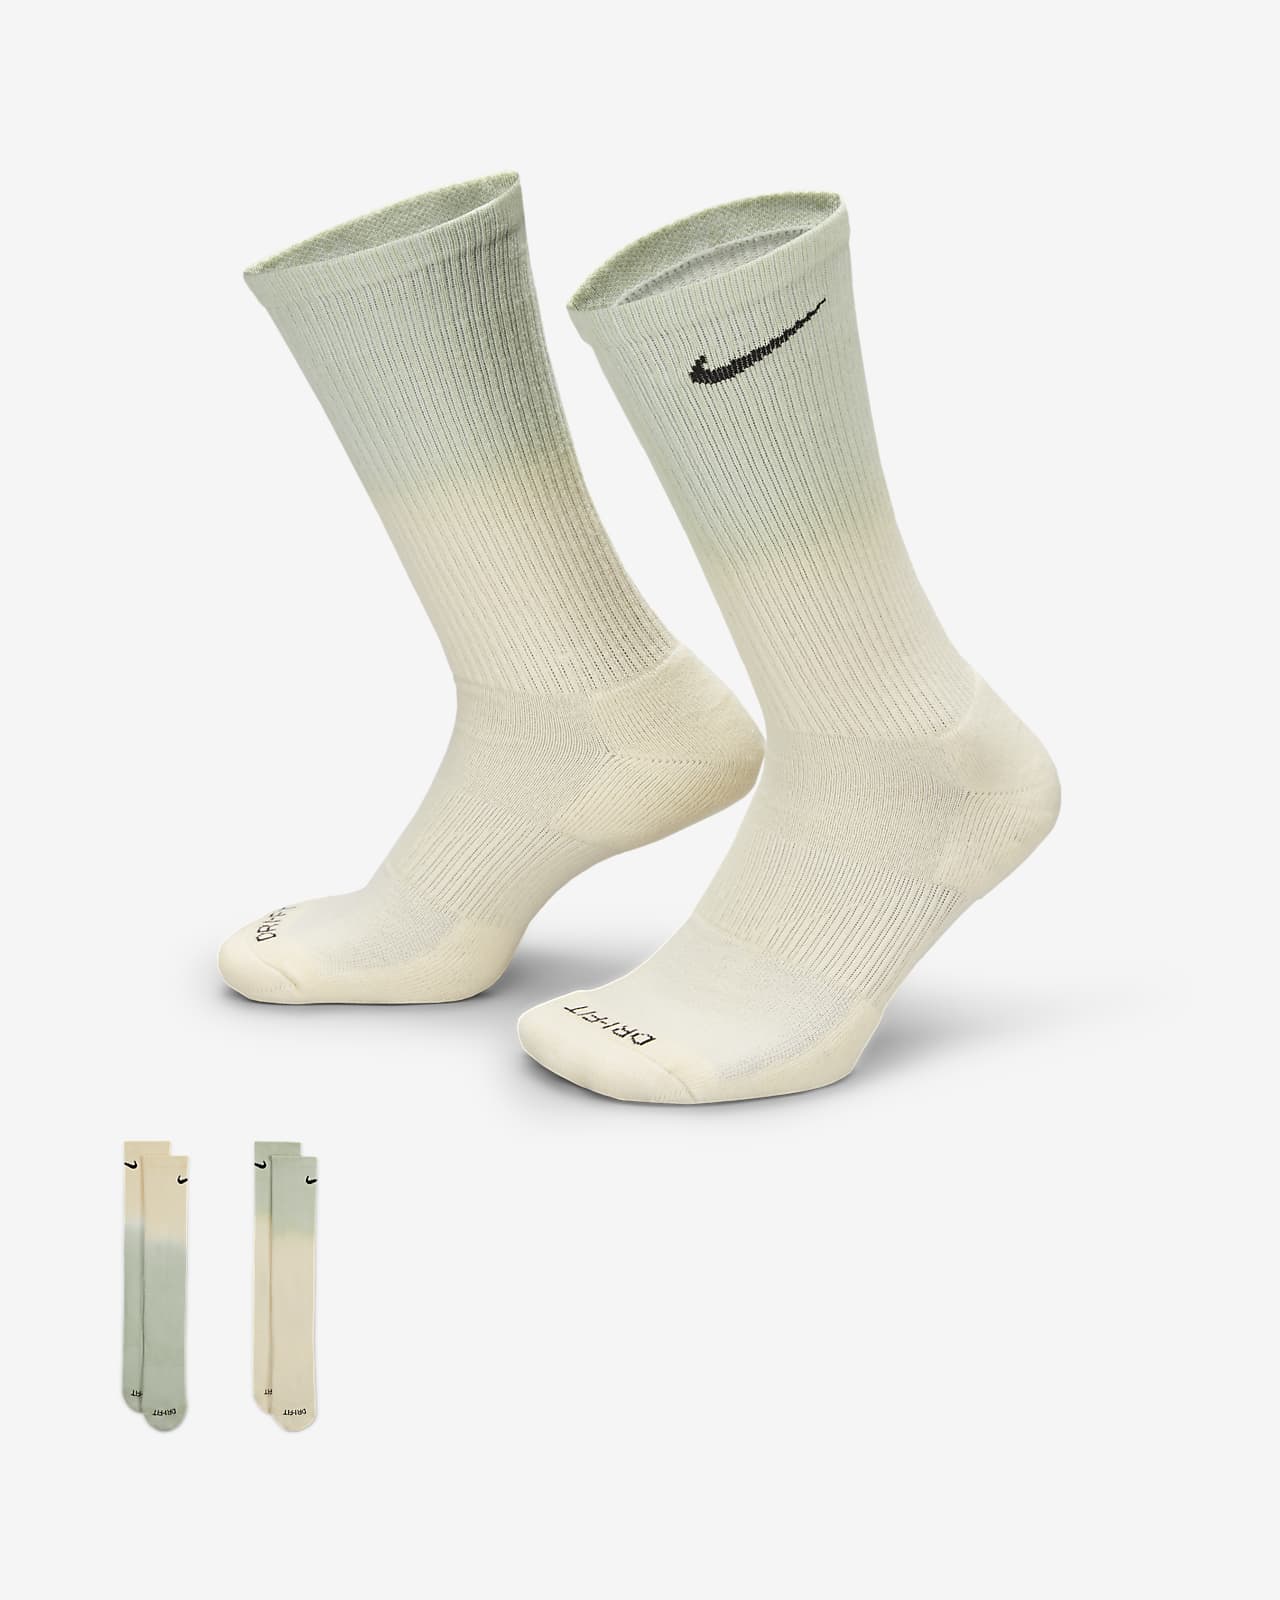 Nike Everyday Cushioned Calcetines largos pares). Nike ES